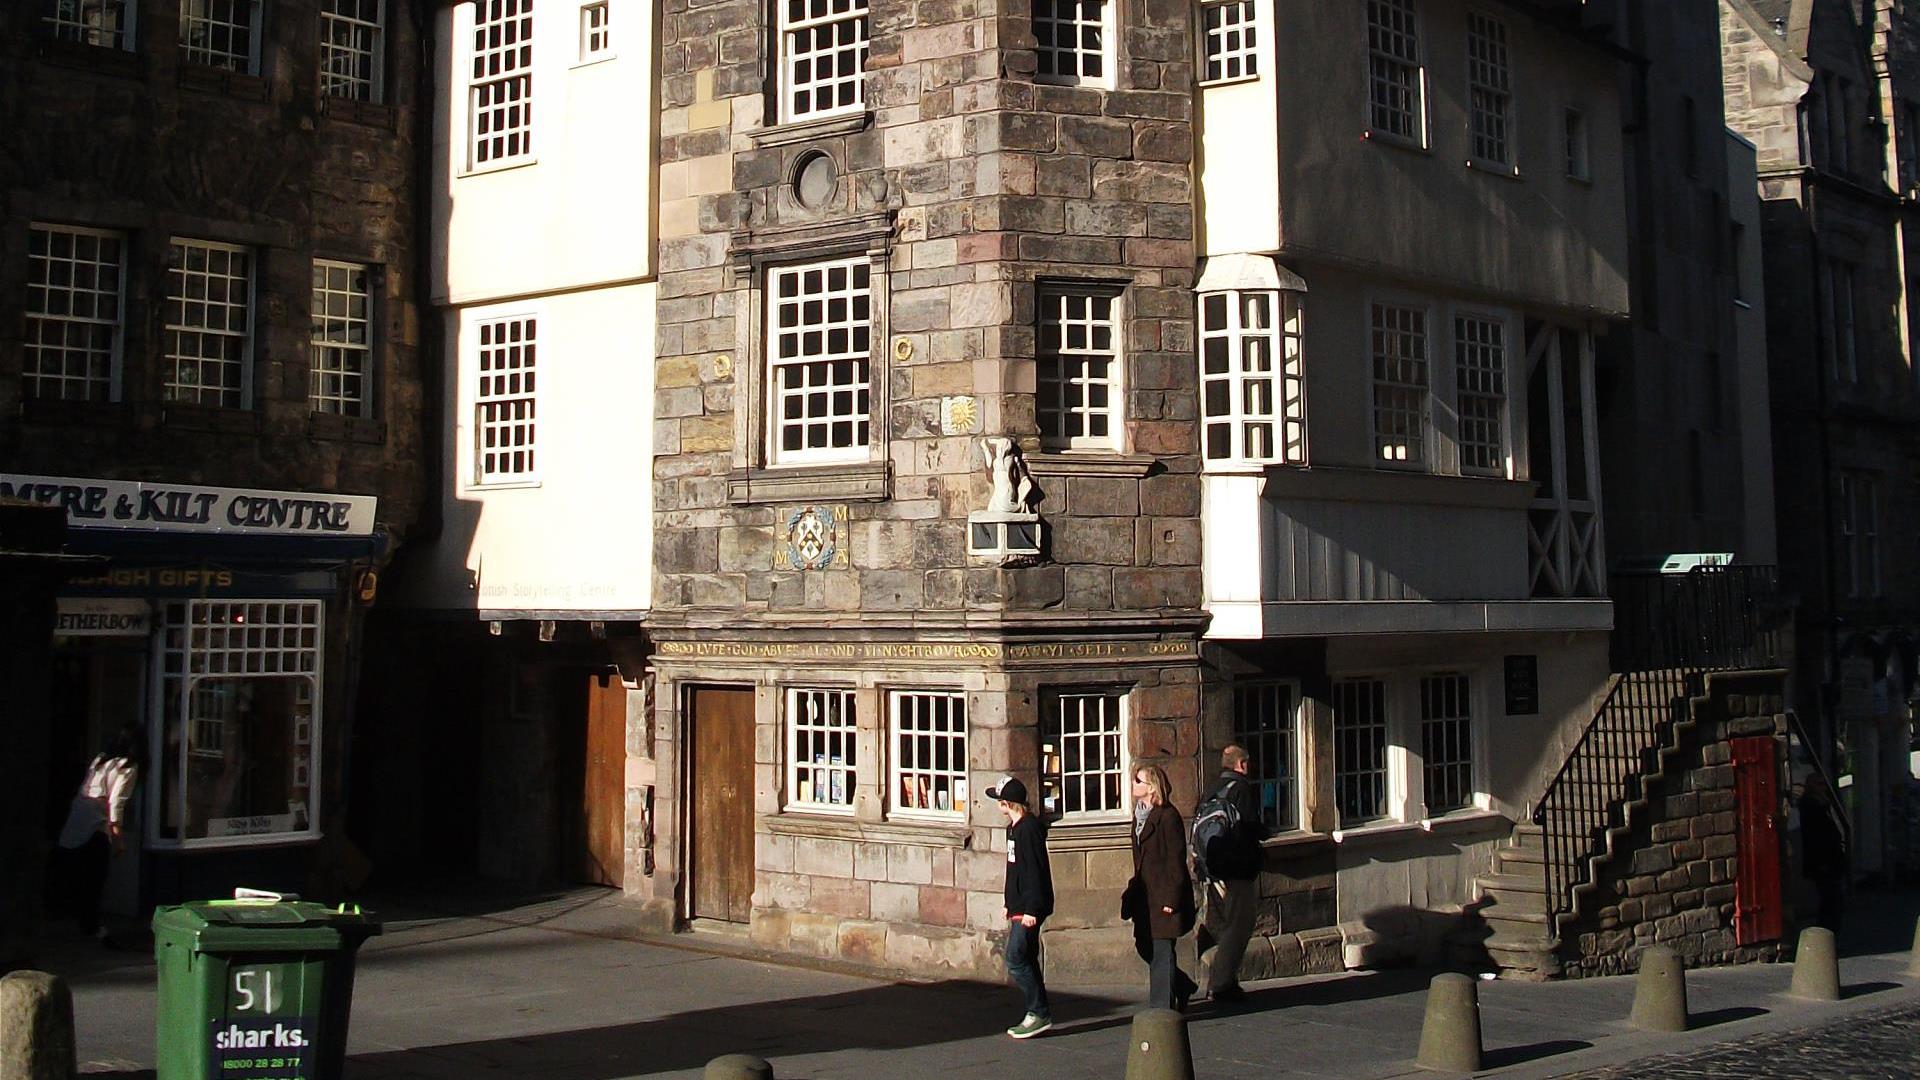 Picture of The Storytelling Centre - The John Knox Entry to the Scottish Storytelling Centre with disabled access.